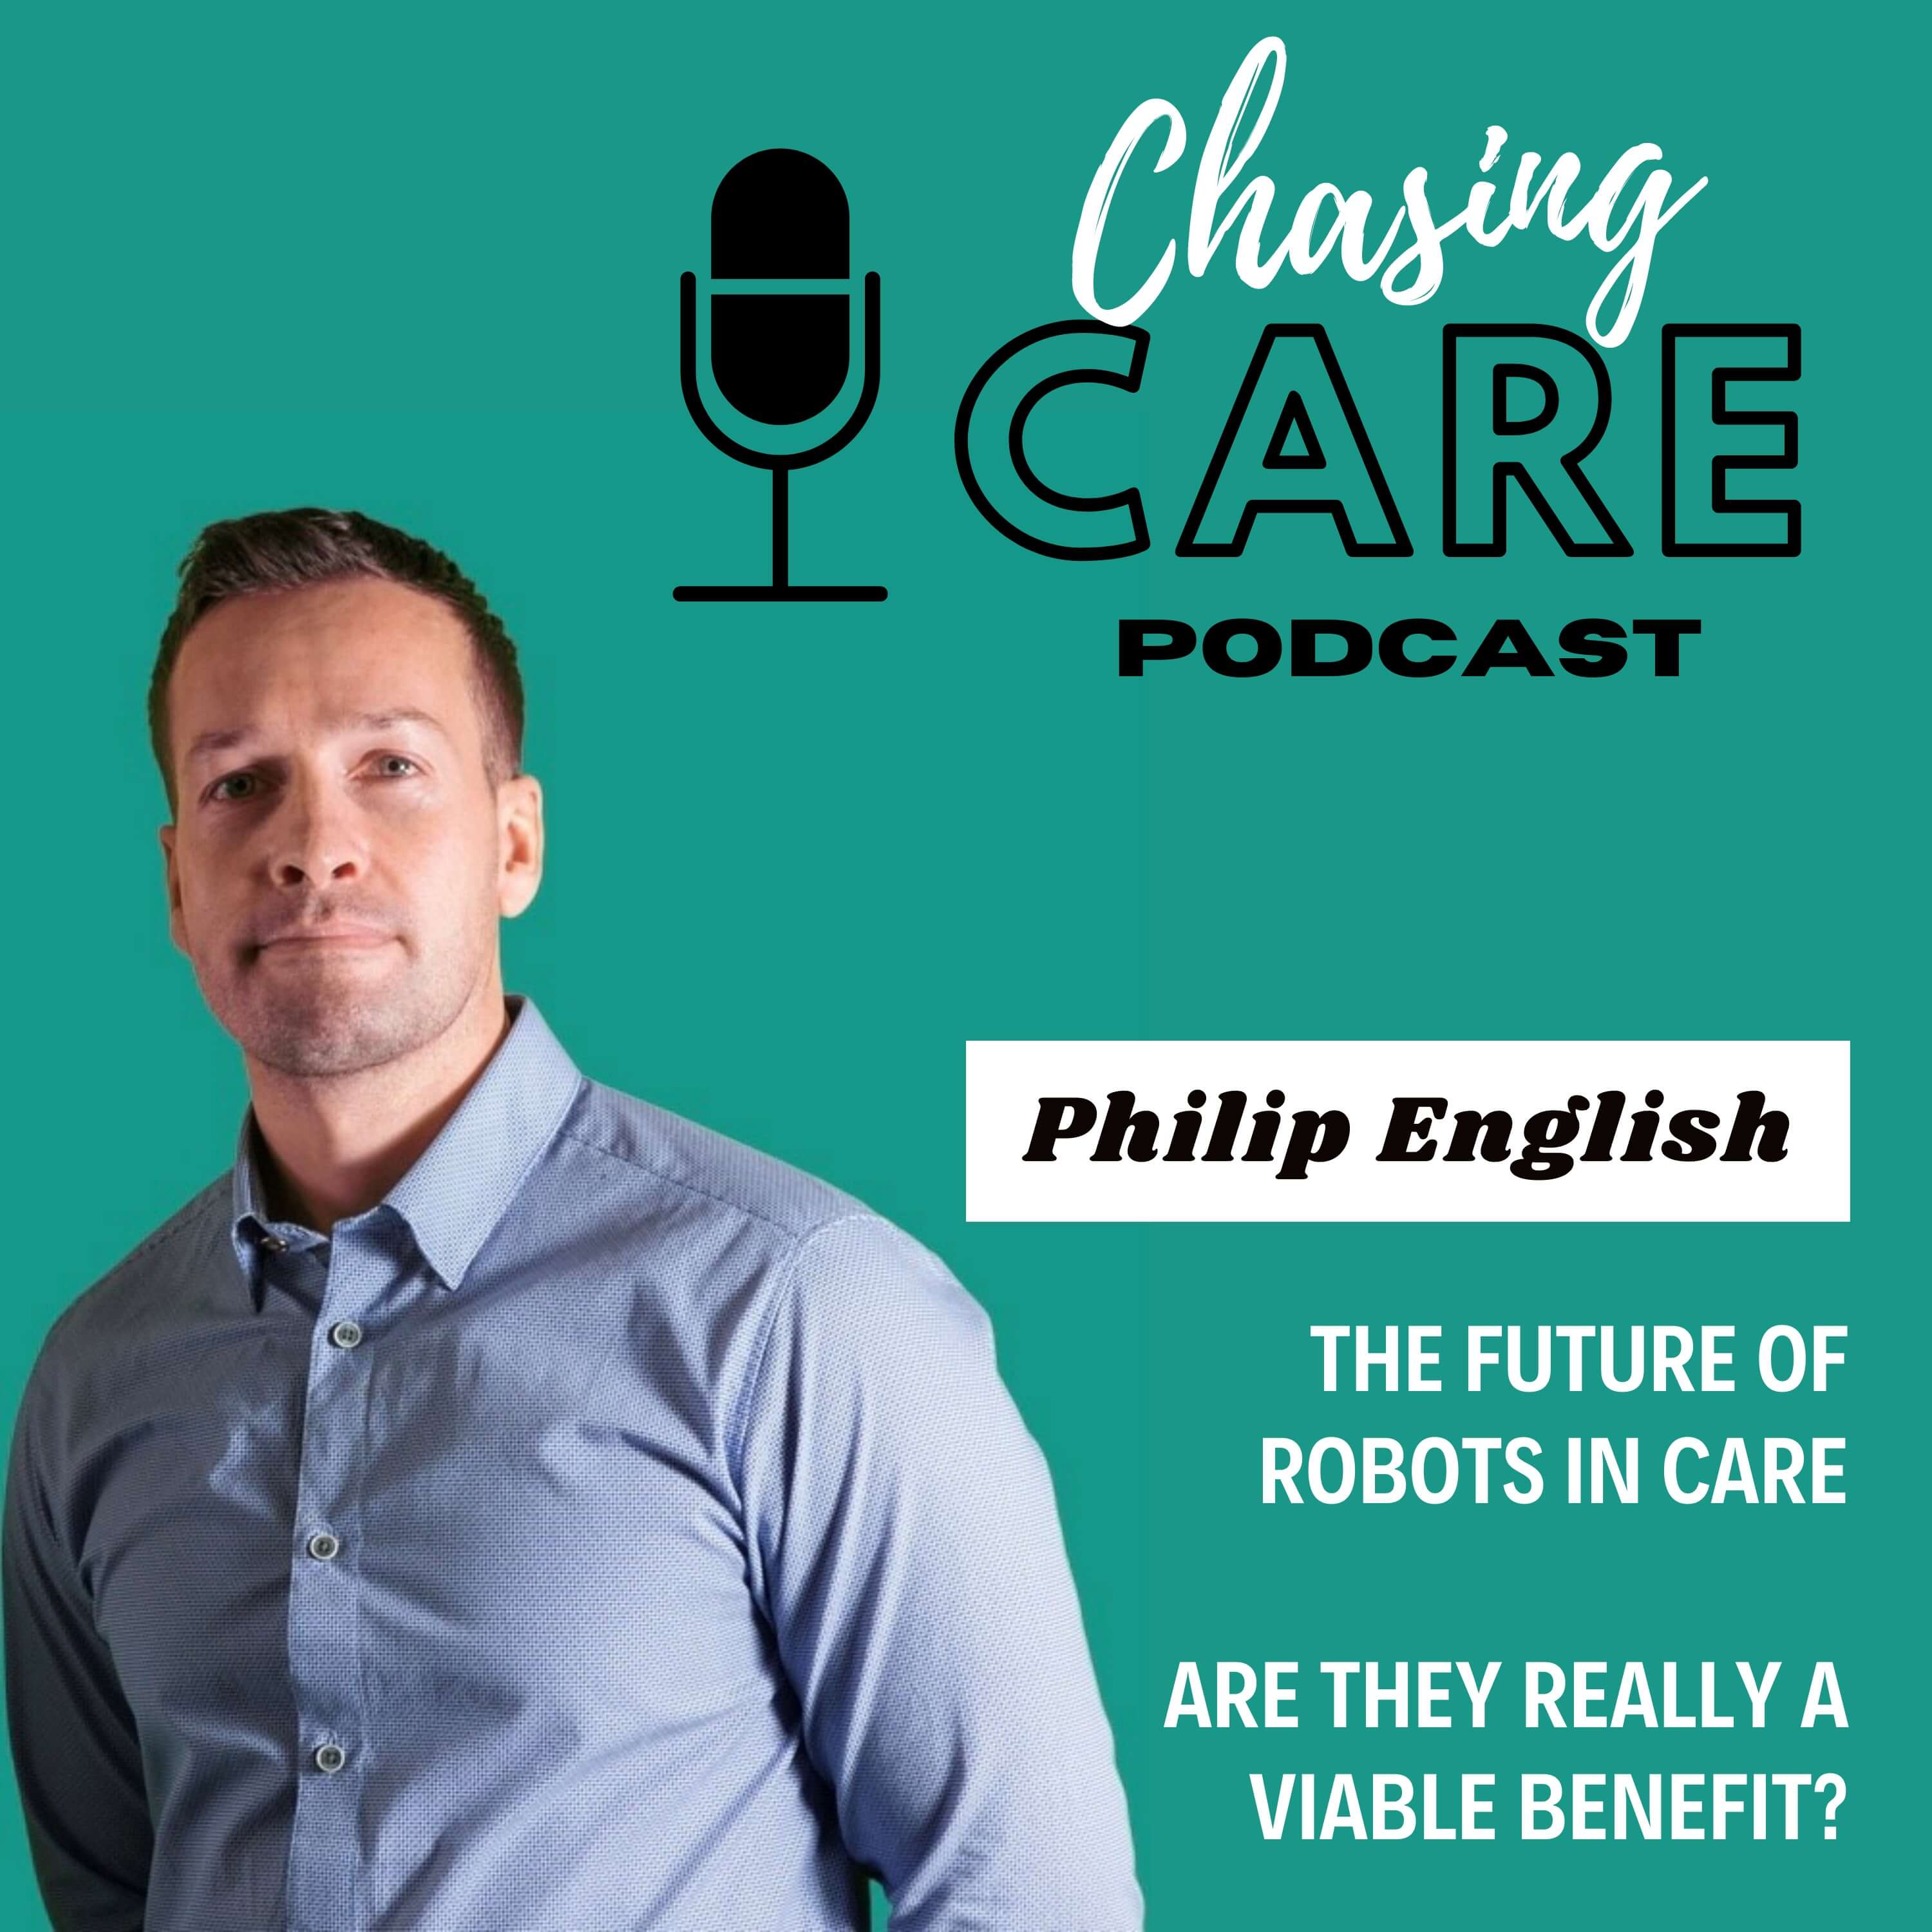 Chasing Care - Philip English from Robots of London explores the benefits of robotics in health & social care